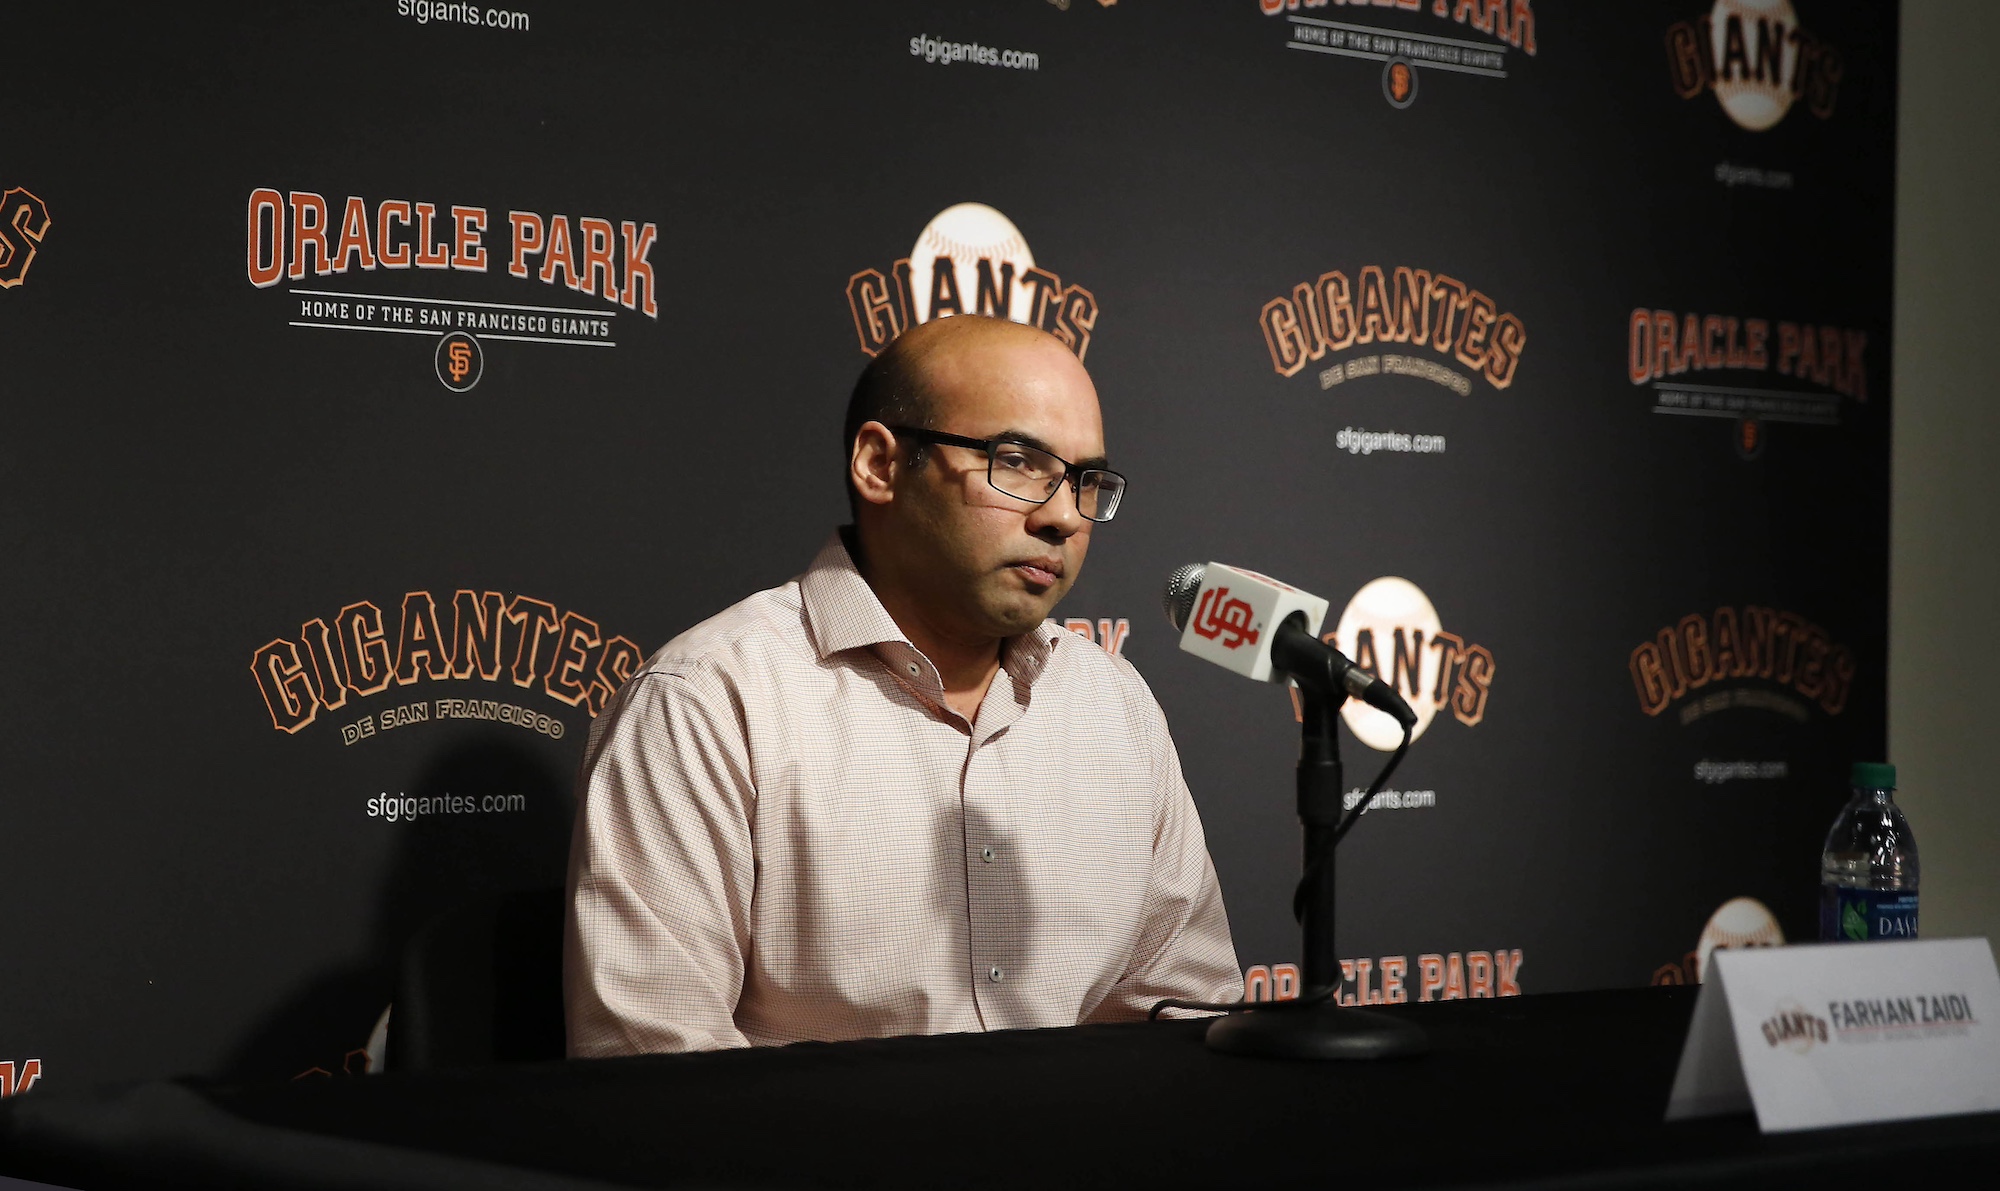 San Francisco Giants president of baseball operations Farhan Zaidi speaks during a news conference at Oracle Park in the Nick Peters interview room on Tuesday, October 1, 2019 in San Francisco, CA.